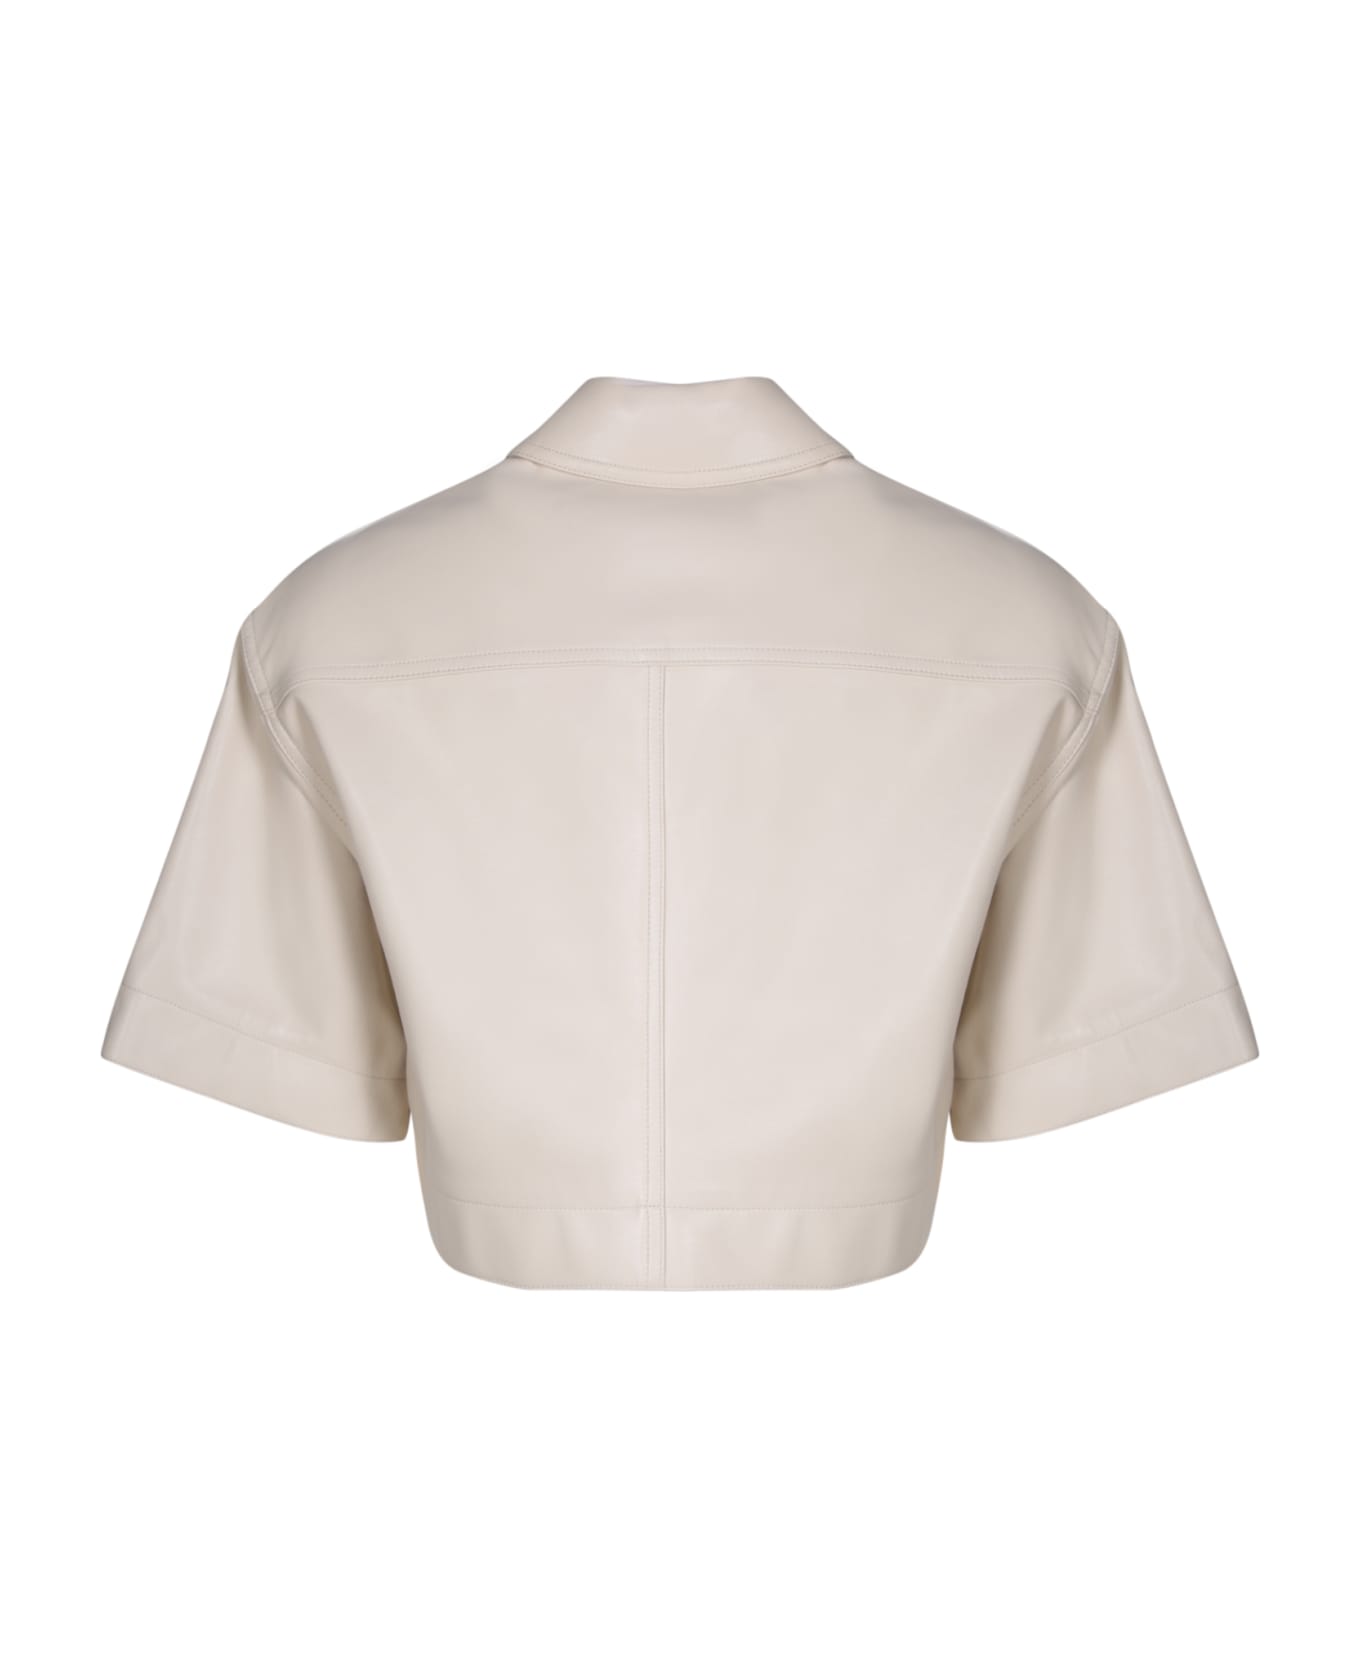 STAND STUDIO Ivory Faux Leather Shirt By Stand Studio - White シャツ